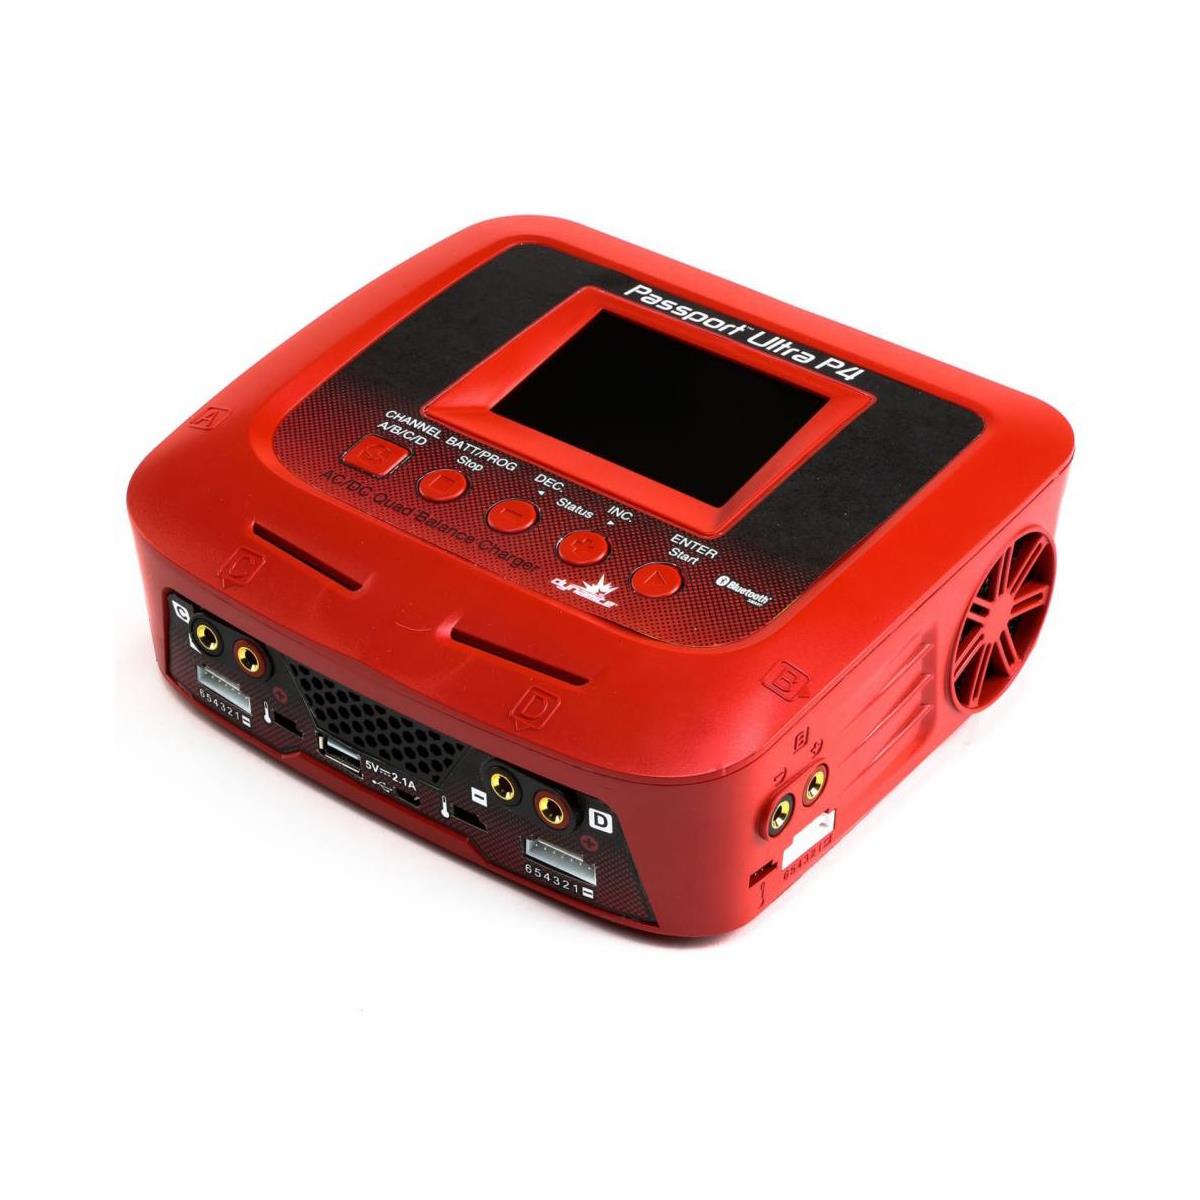 Image of Dynamite Passport P4 200W AC/DC 4-Port Multicharger with Bluetooth Connectivity